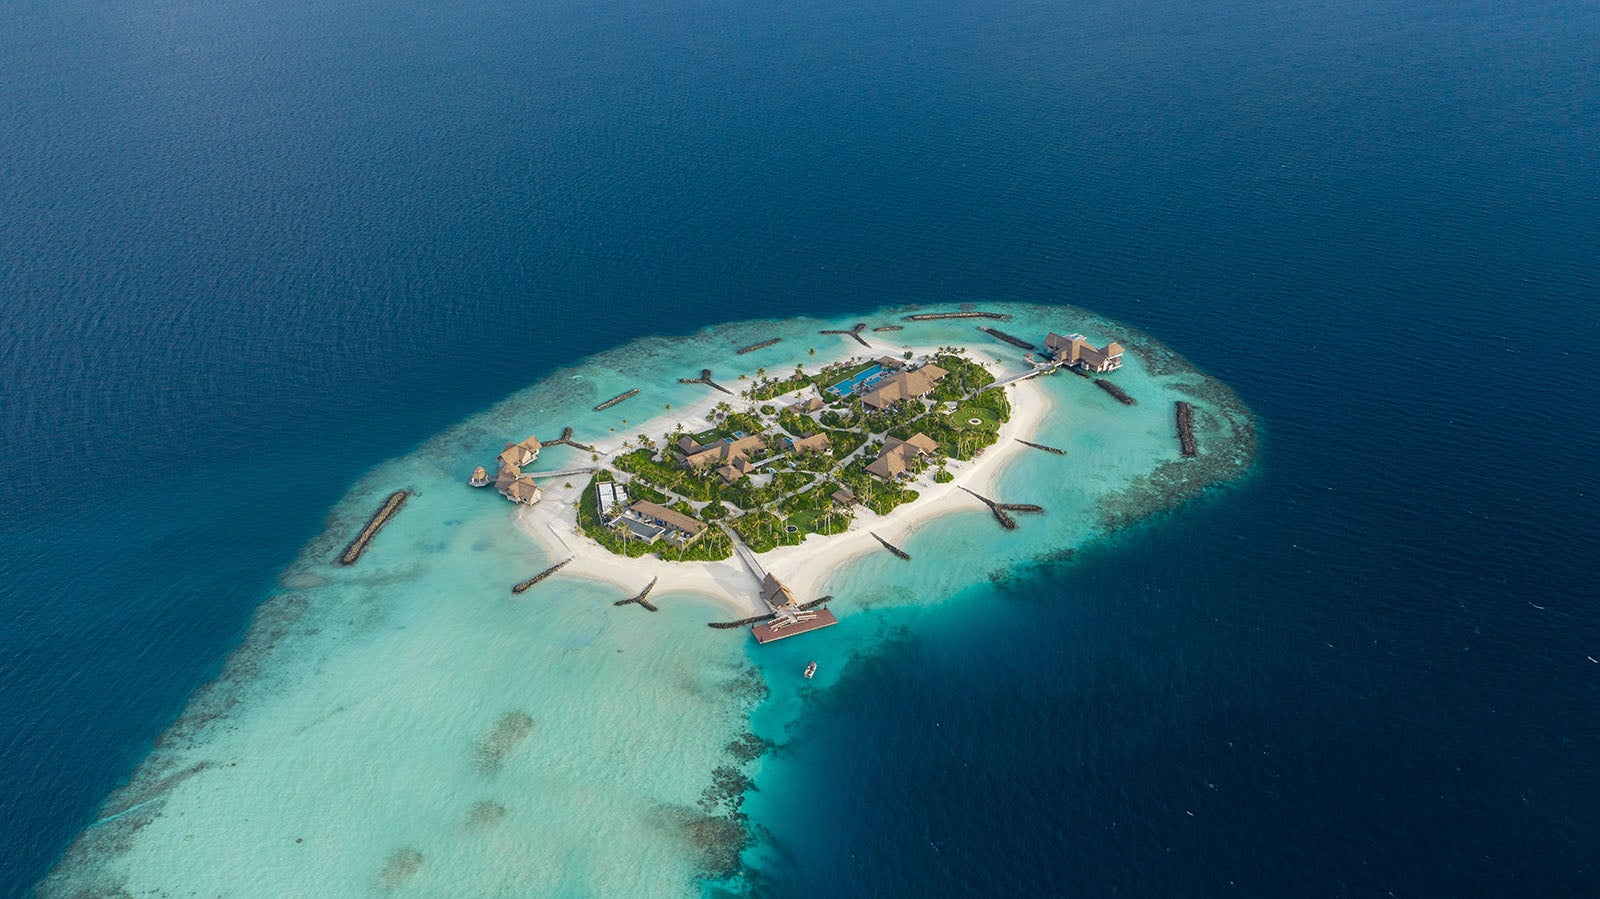 The Maldives just got even more exclusive with The Private Island at the Waldorf Astoria Maldives Ithaafushi